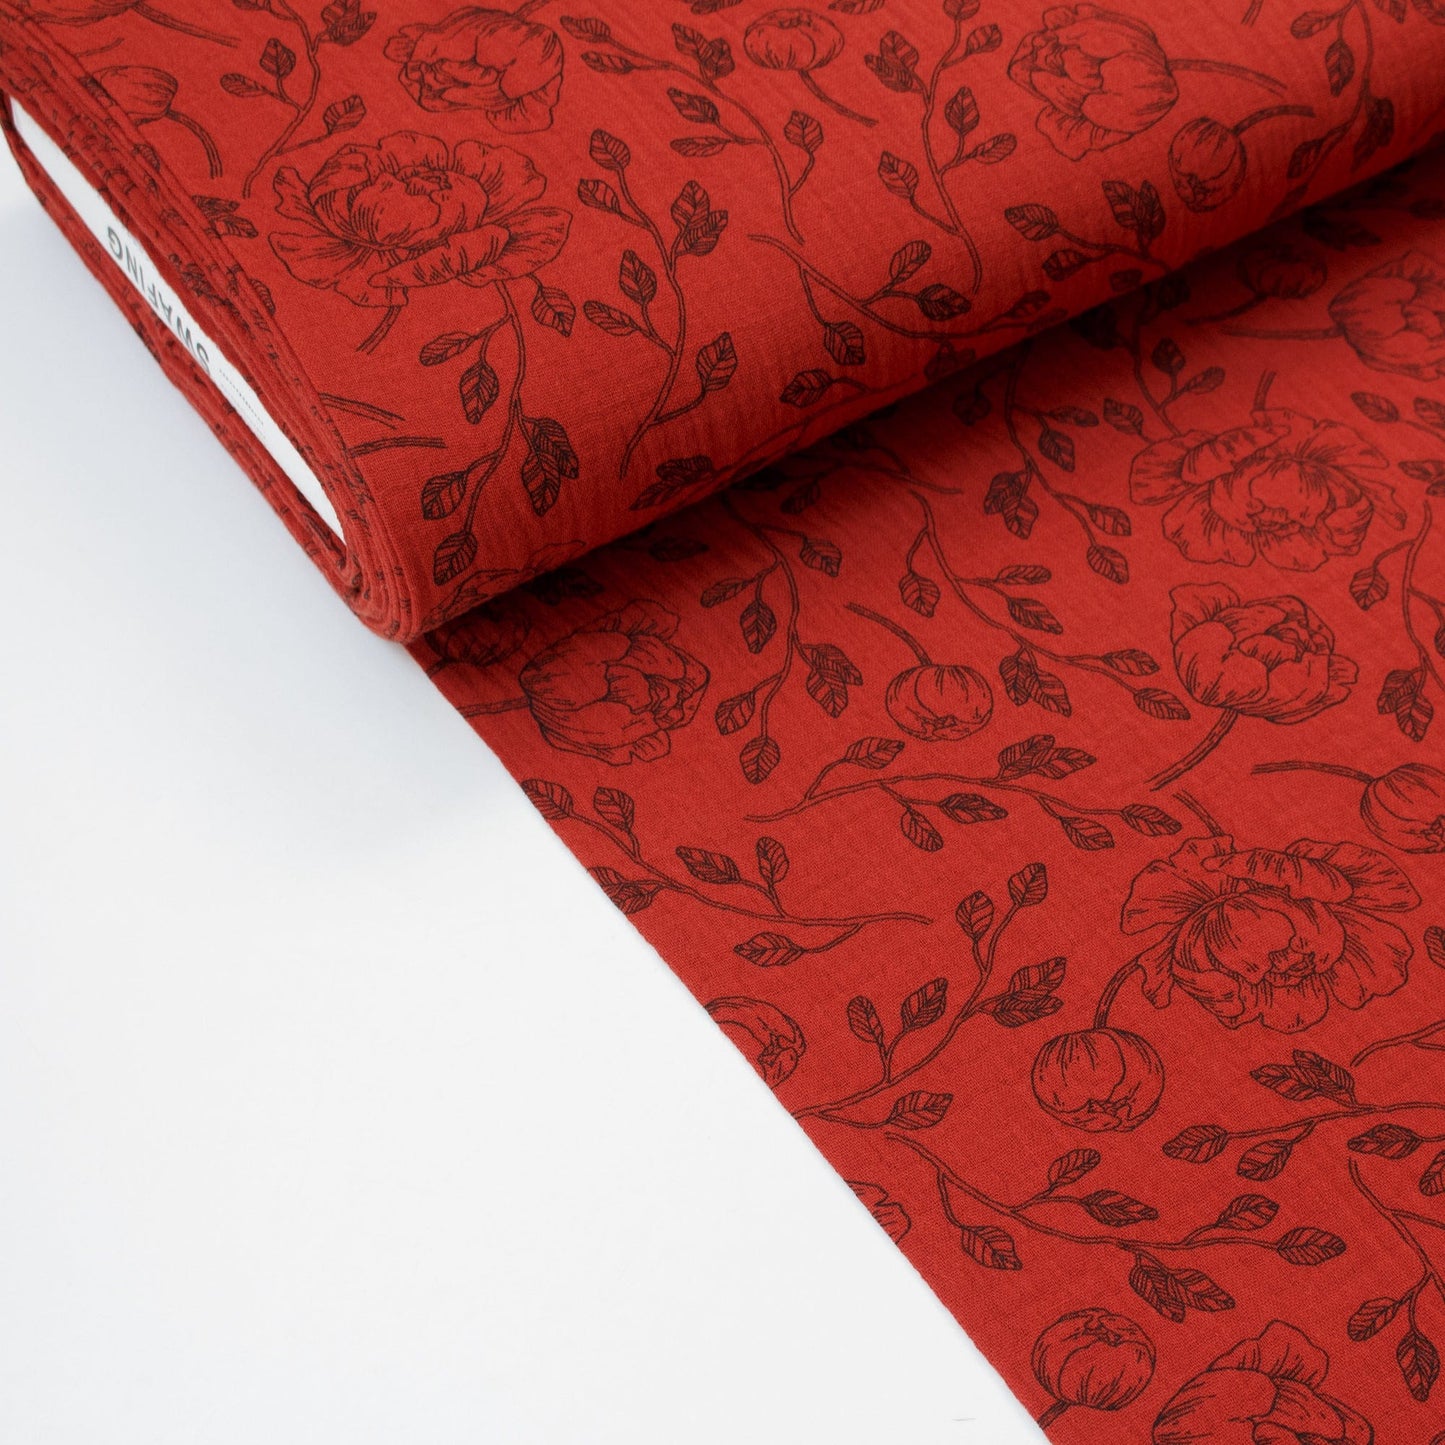 Cotton Double Gauze in Red with Rose Print